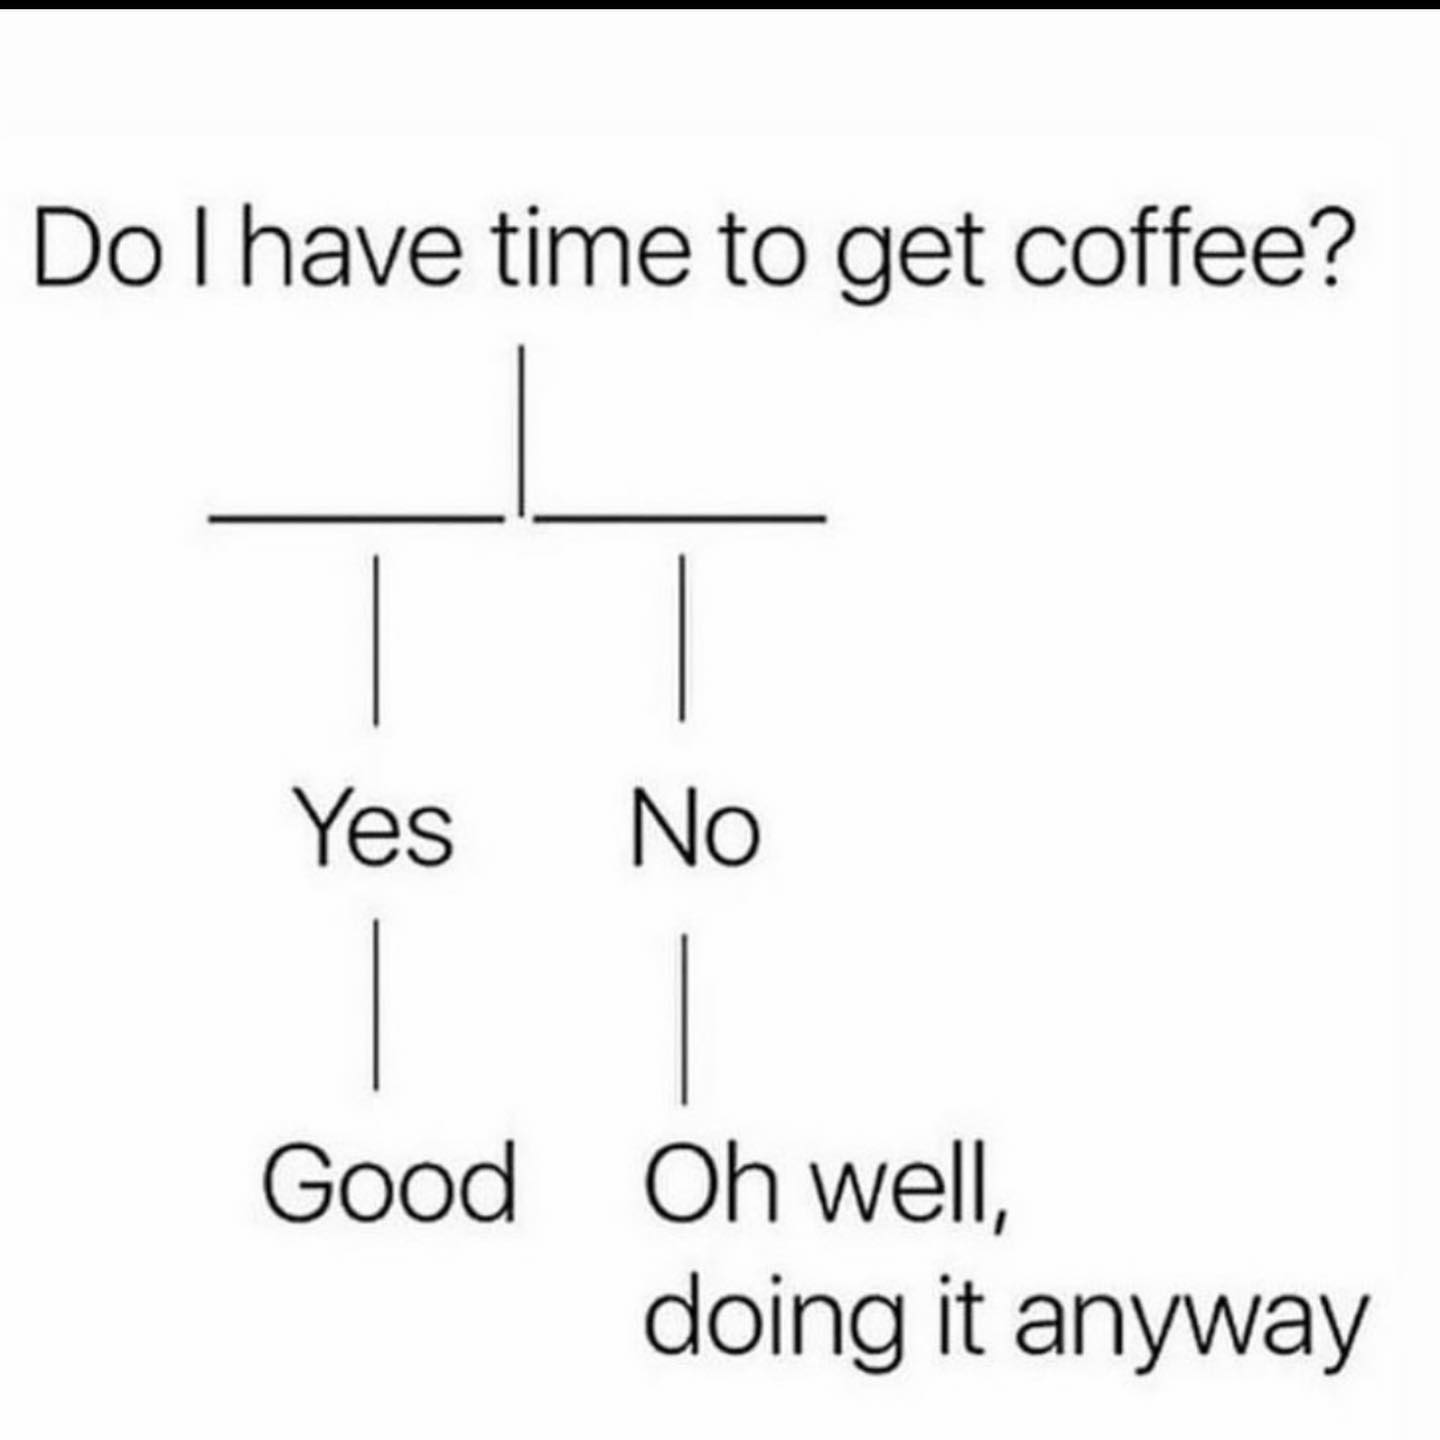 do i have time to get coffee, yes, no, oh well doing it anyway